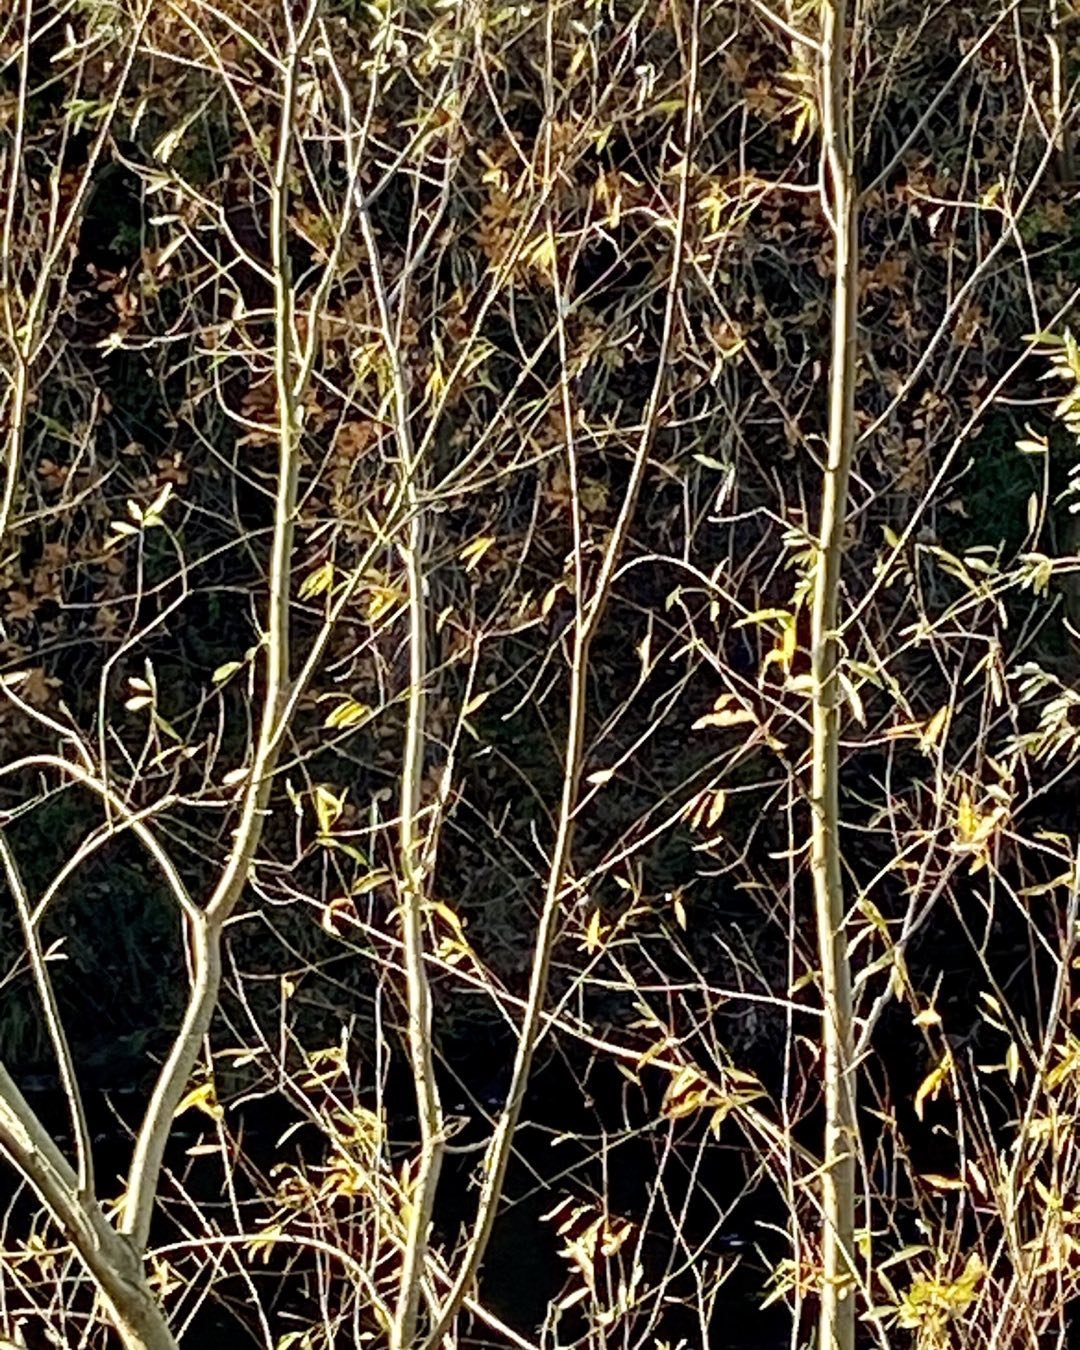 Early leaves on the Willow

Sometimes the simple things are the most beautiful 

#willow #branches #branches #treebranches❤️ #treebrancheseverywhere #willows #newleaves🌿 #lesleyseegerpaintings #darkandlightphotography